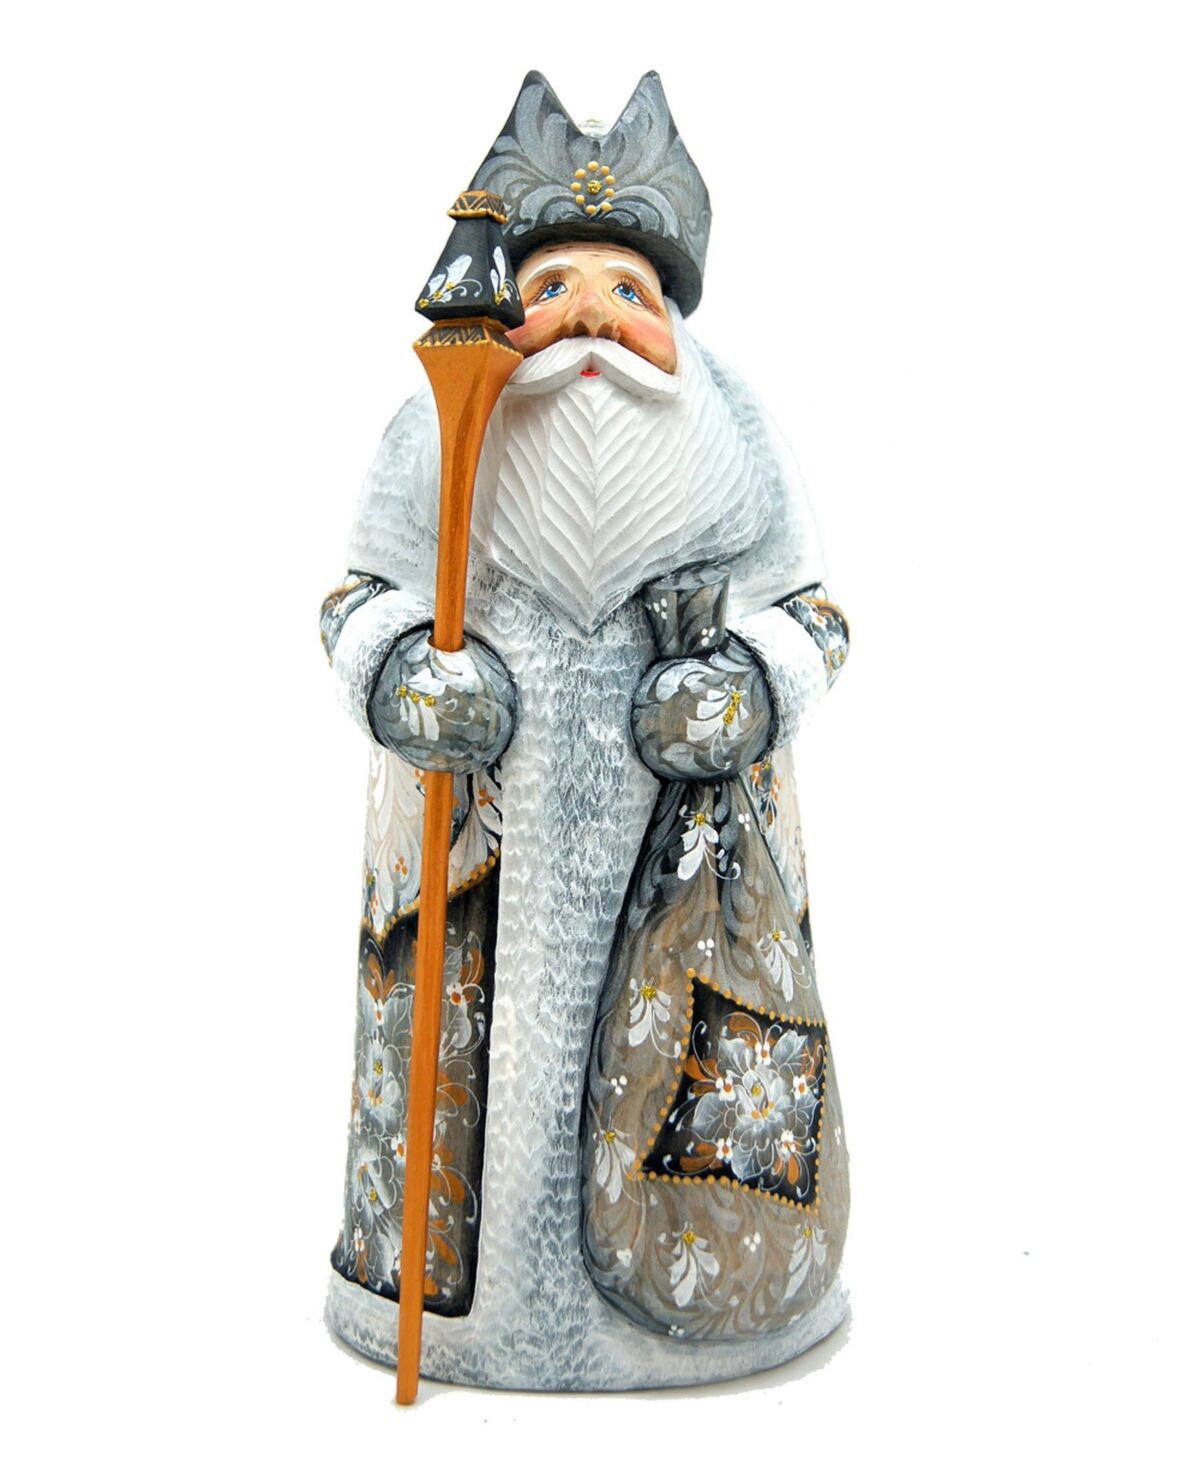 G.DeBrekht Woodcarved and Hand Painted Ornaments Santa Figurine - Multi